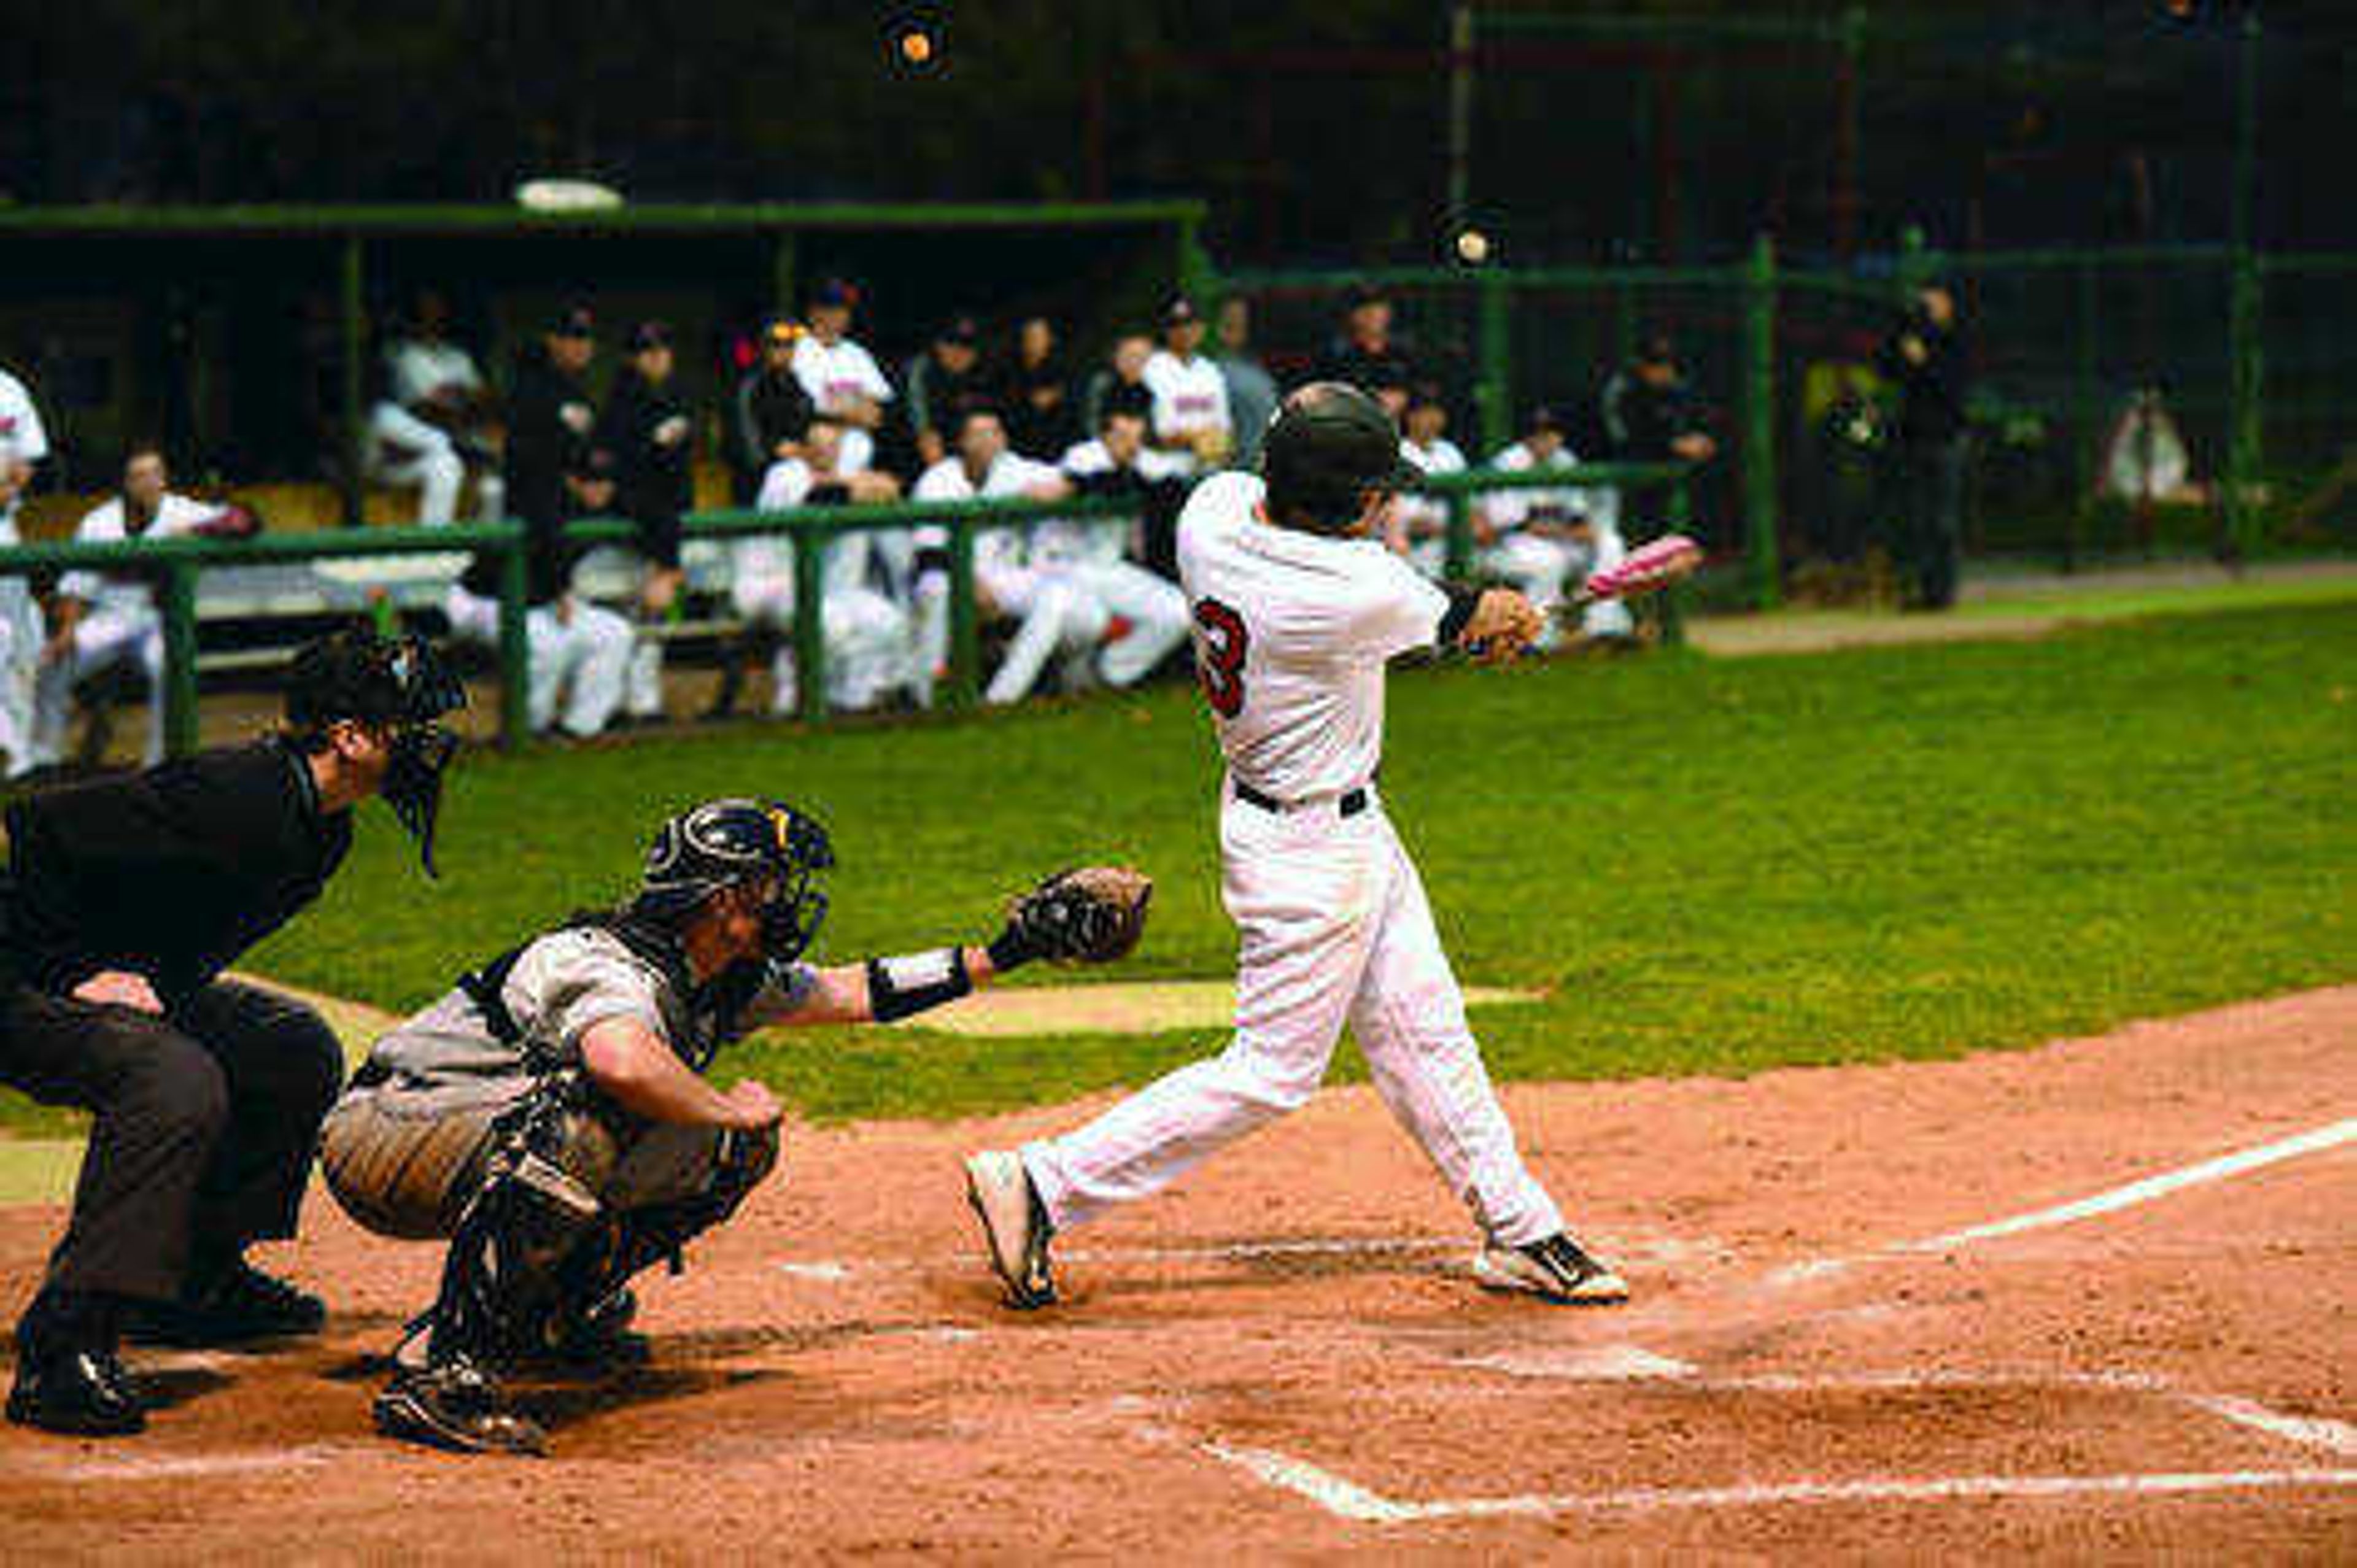 Junior shortstop Branden Boggetto hits a foul against SIU on April 14 at Capaha Field. Submitted photo